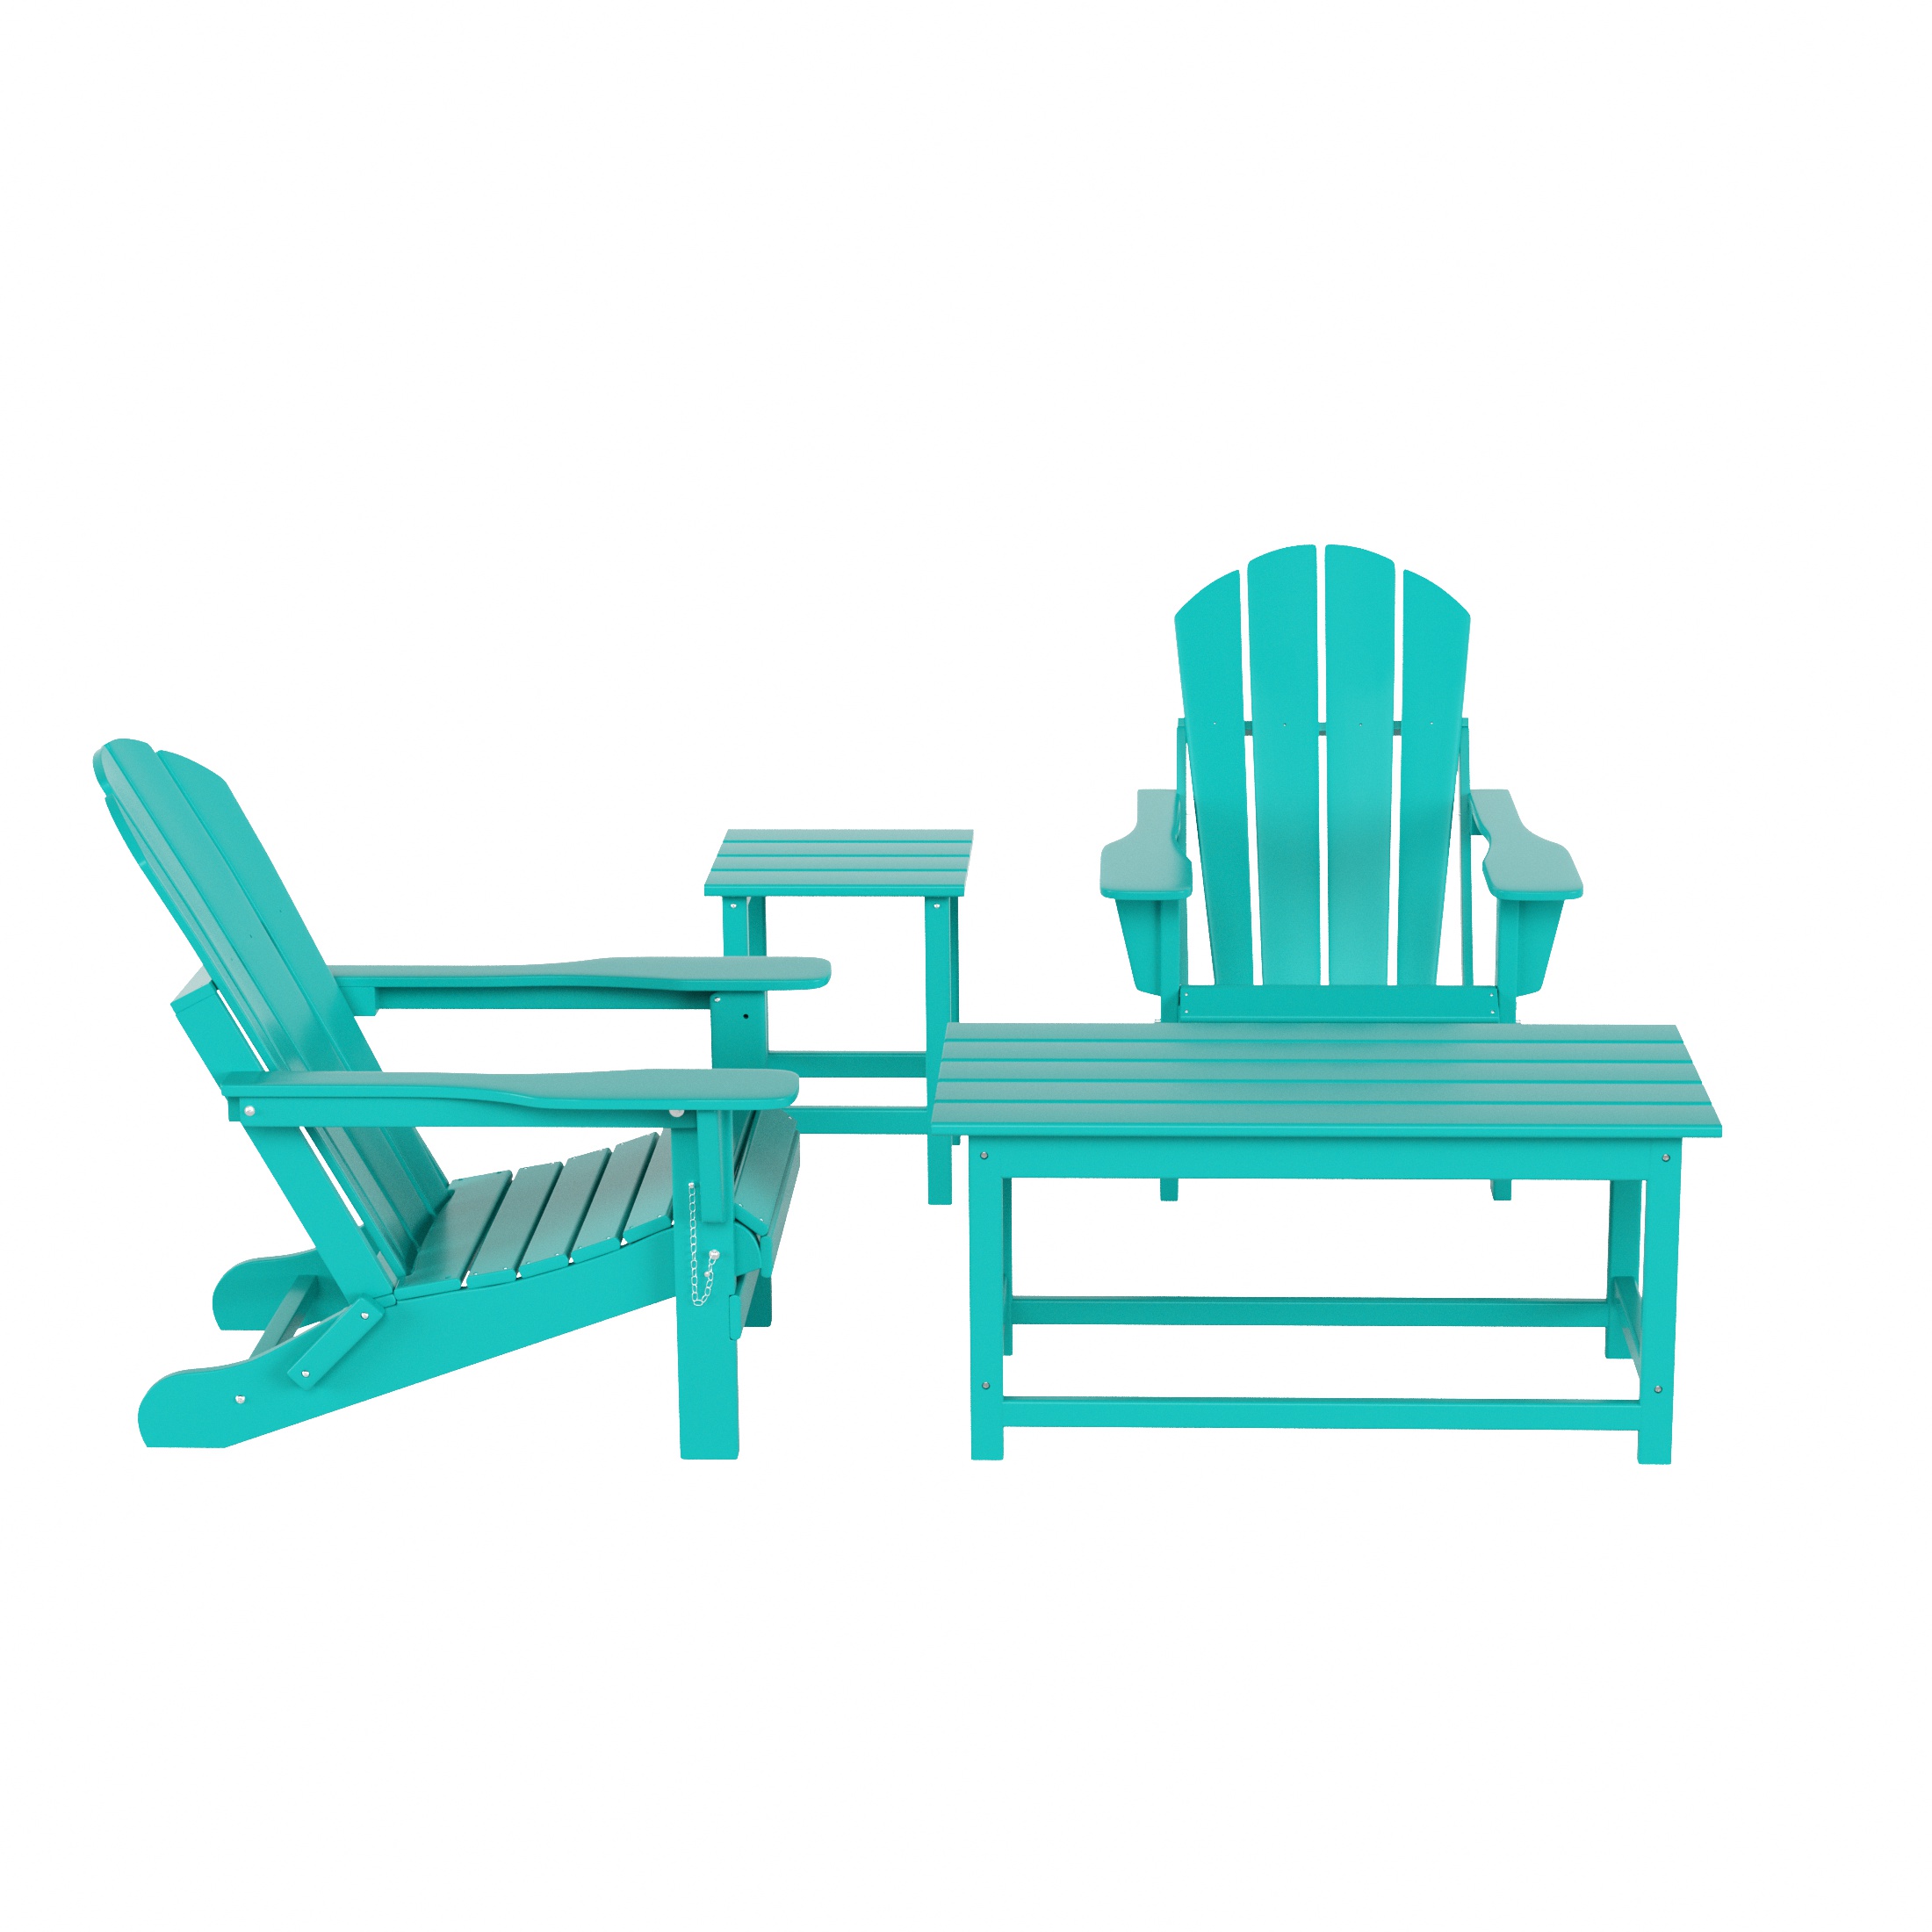 WestinTrends Malibu 4-Pieces Outdoor Patio Furniture Set, All Weather Outdoor Seating Plastic Adirondack Chair Set of 2 with Coffee Table and Side Table, Turquoise - image 3 of 7